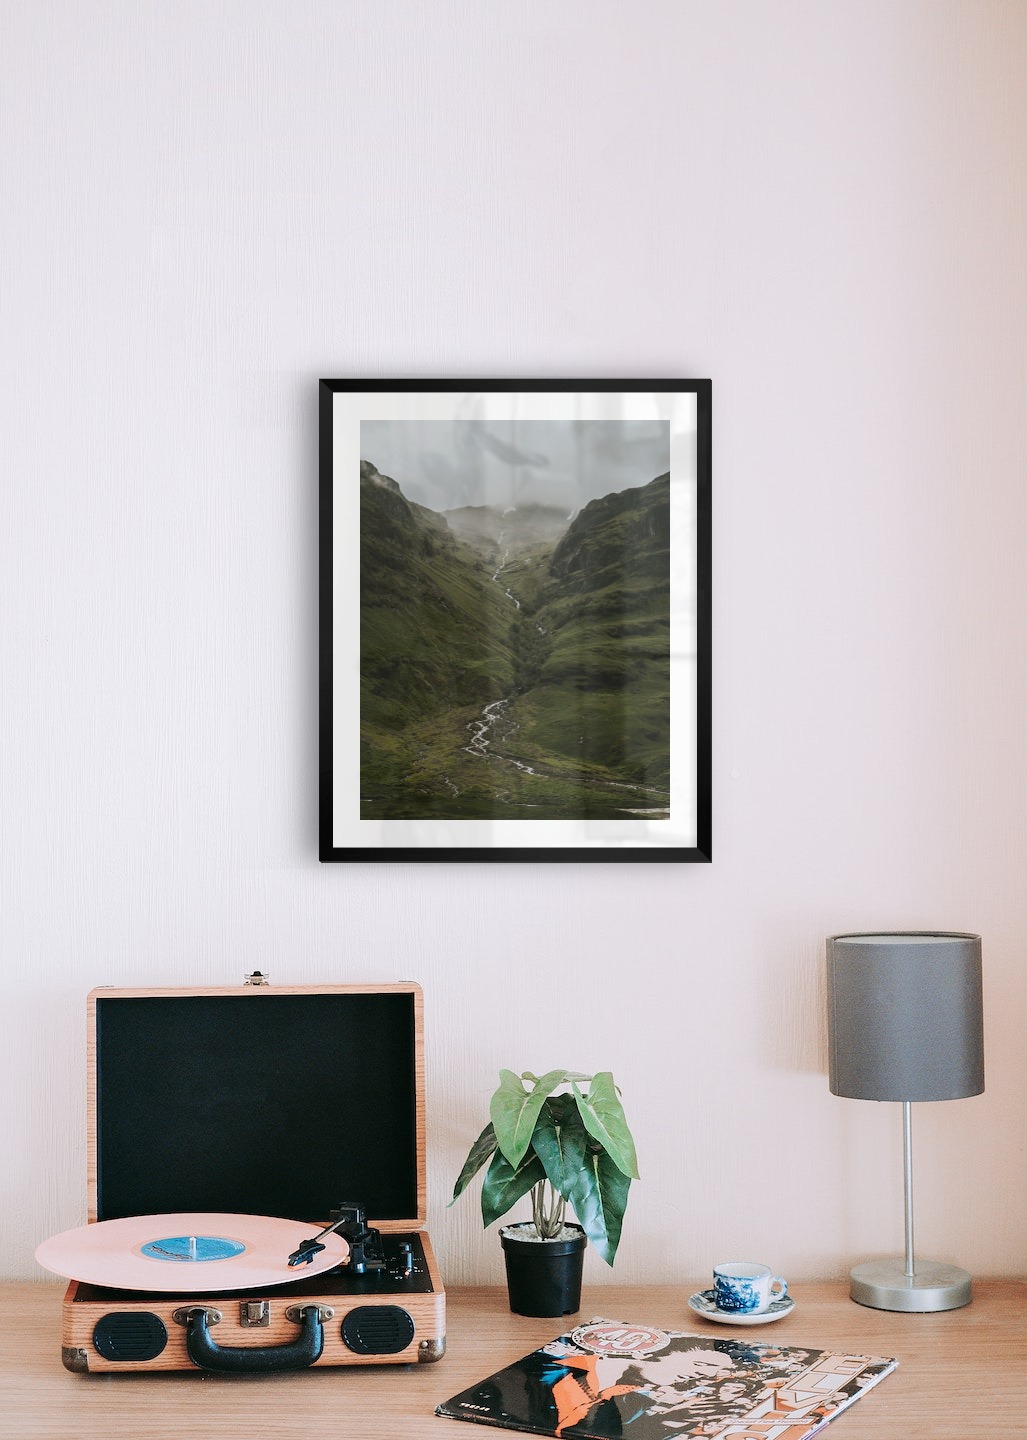 Gallery wall with picture frame in black in size 40x50 with print "Stream in valley"